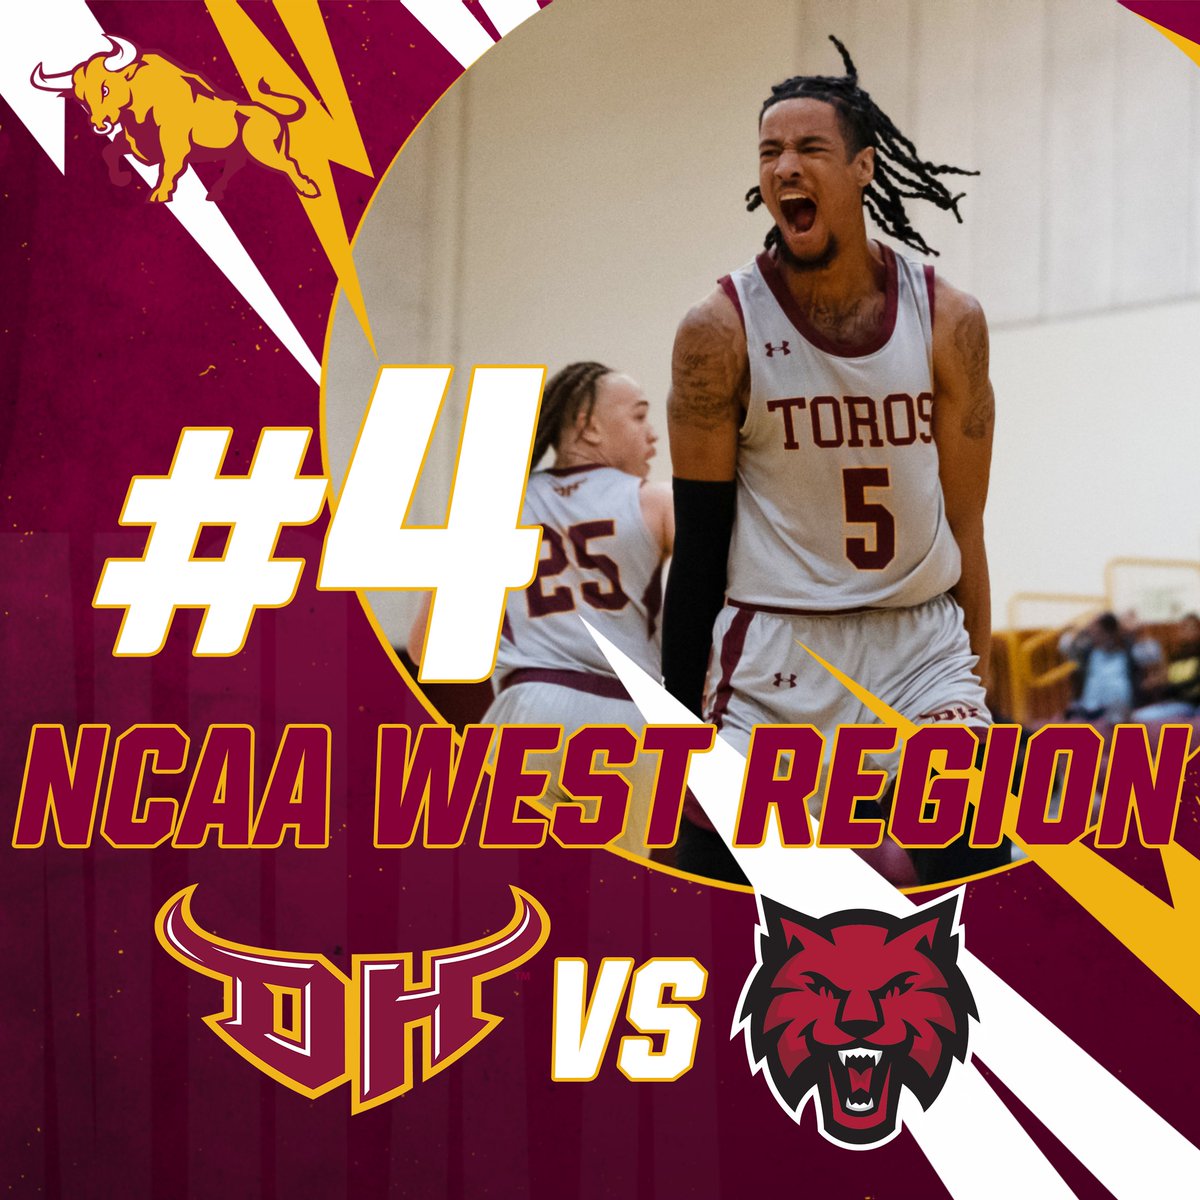 @CSUDHmbb came in at the 4th seed of the upcoming NCAA Div. II West Region tournament where they will face 5th seed Central Washington at Cal State LA's University Gym this Friday!